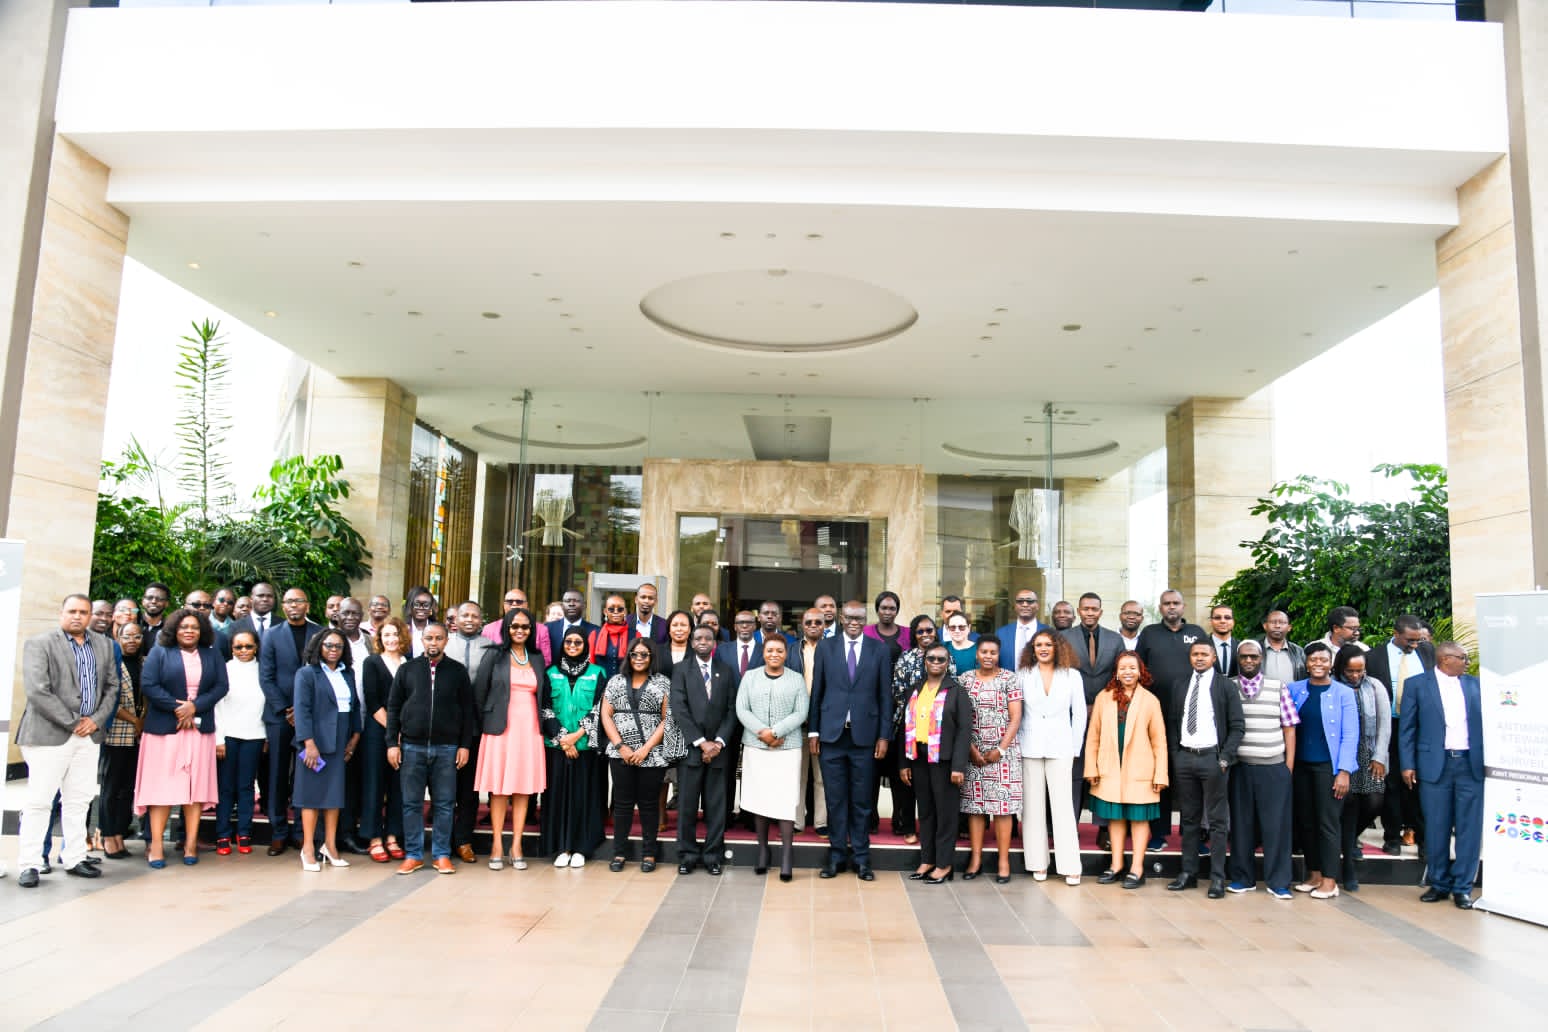 Regional Meeting in Nairobi Aims to Combat Antimicrobial Resistance (AMR) Threat